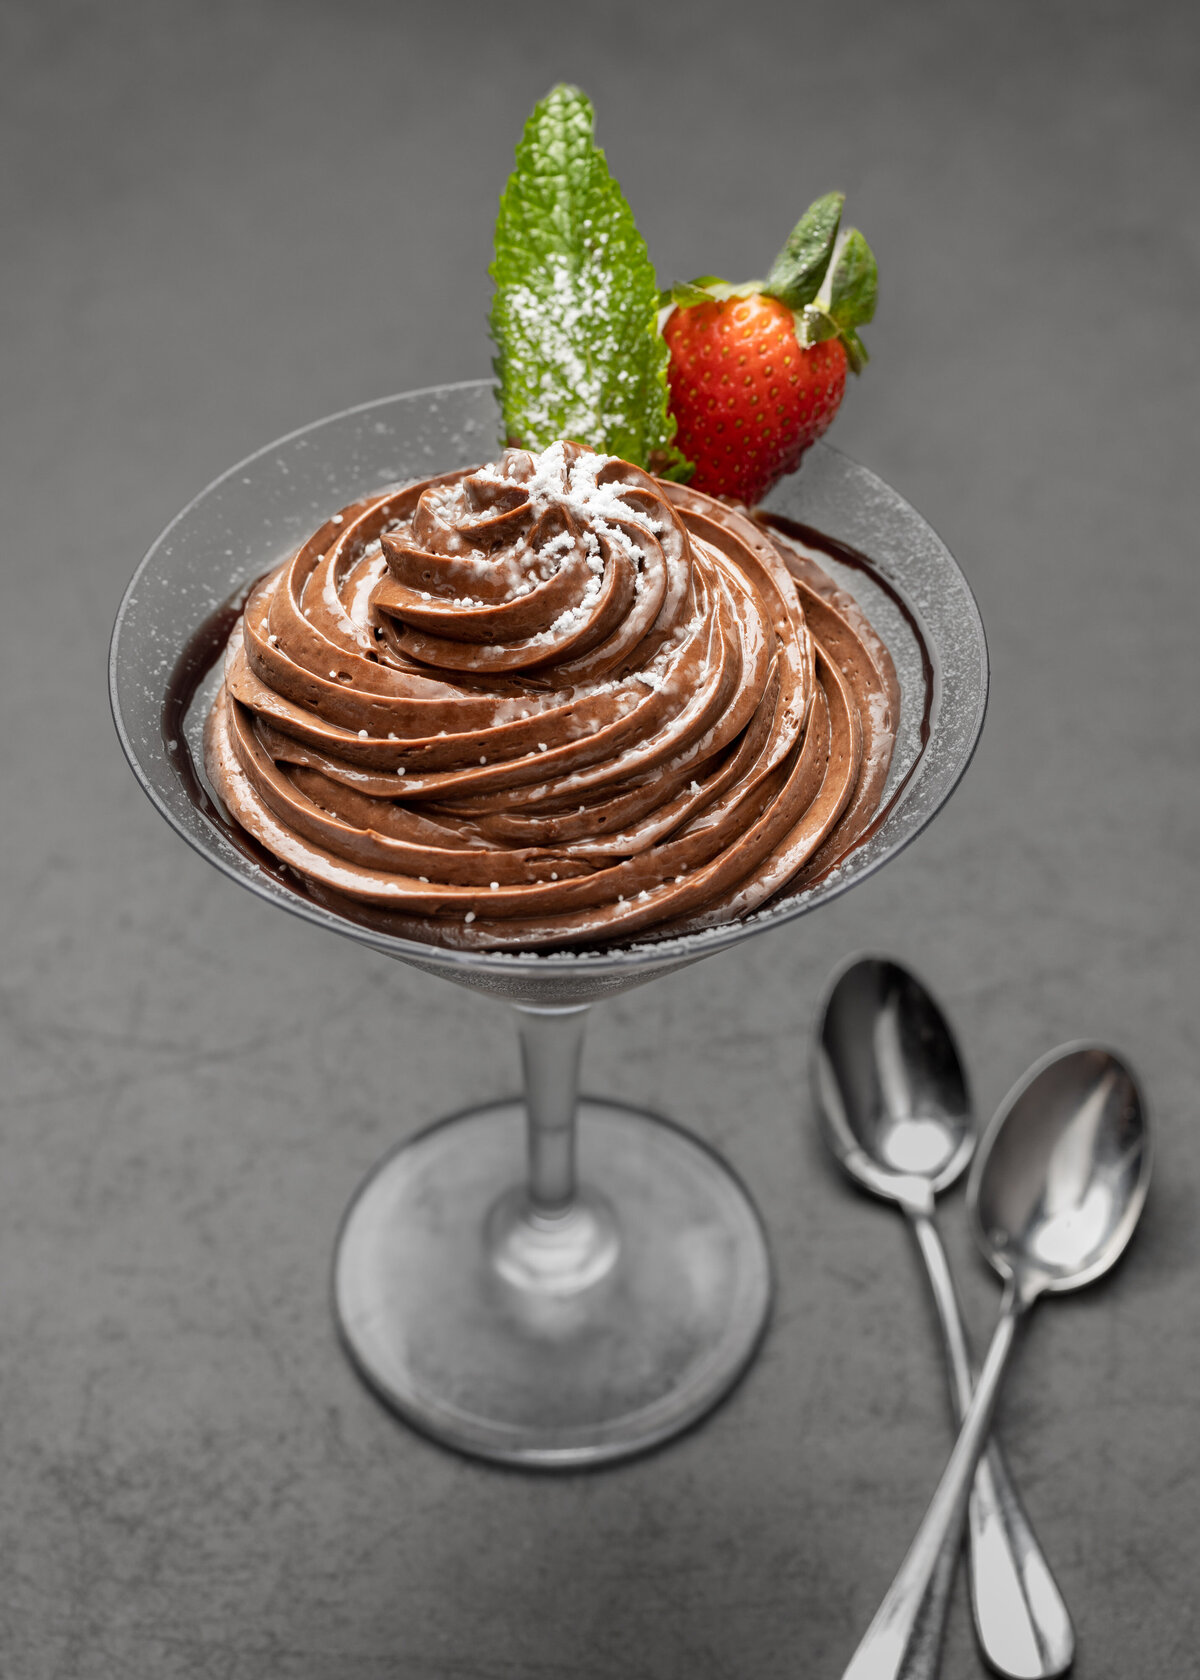 Whipped mousse in a stemmed glass